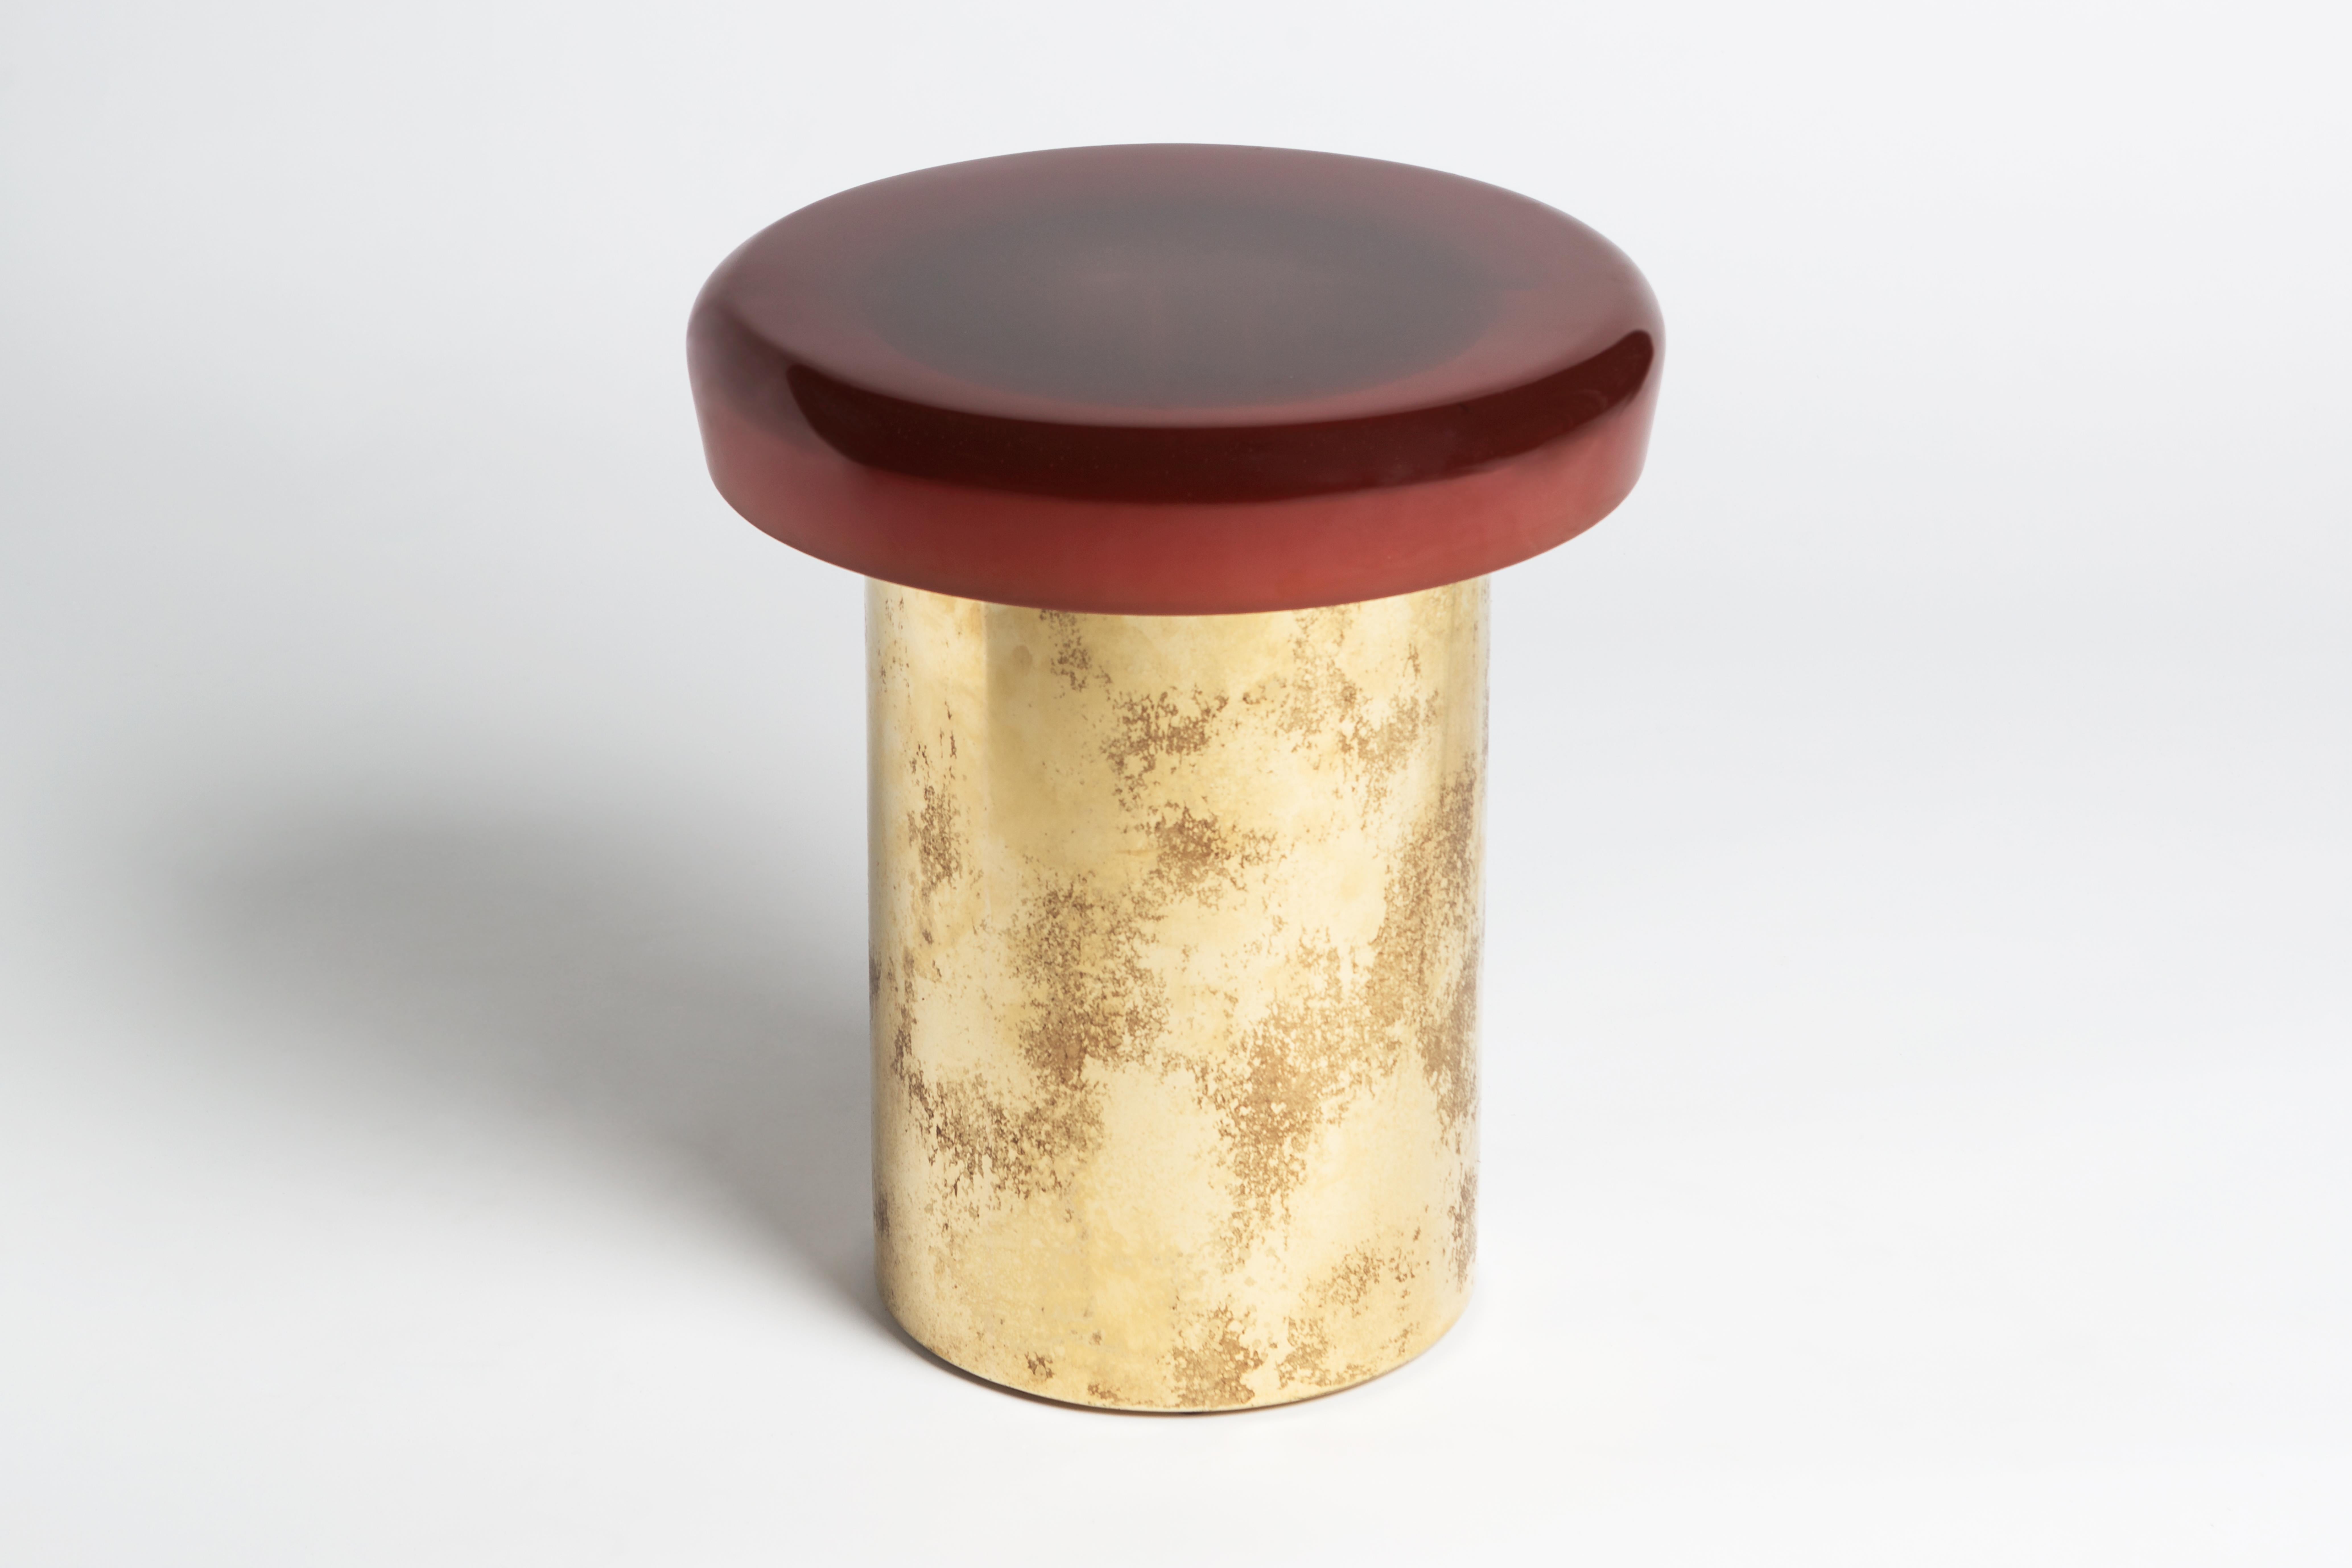 Jade stool by Draga & Aurel
Dimensions: W 40, D 40, H 46, top Ø 40 cm
Materials: Resin and bronze

Formed from a combination of reflective resin and solid brass, the Jade coffee tables look like precious gems. The surface is made by hand in resin of